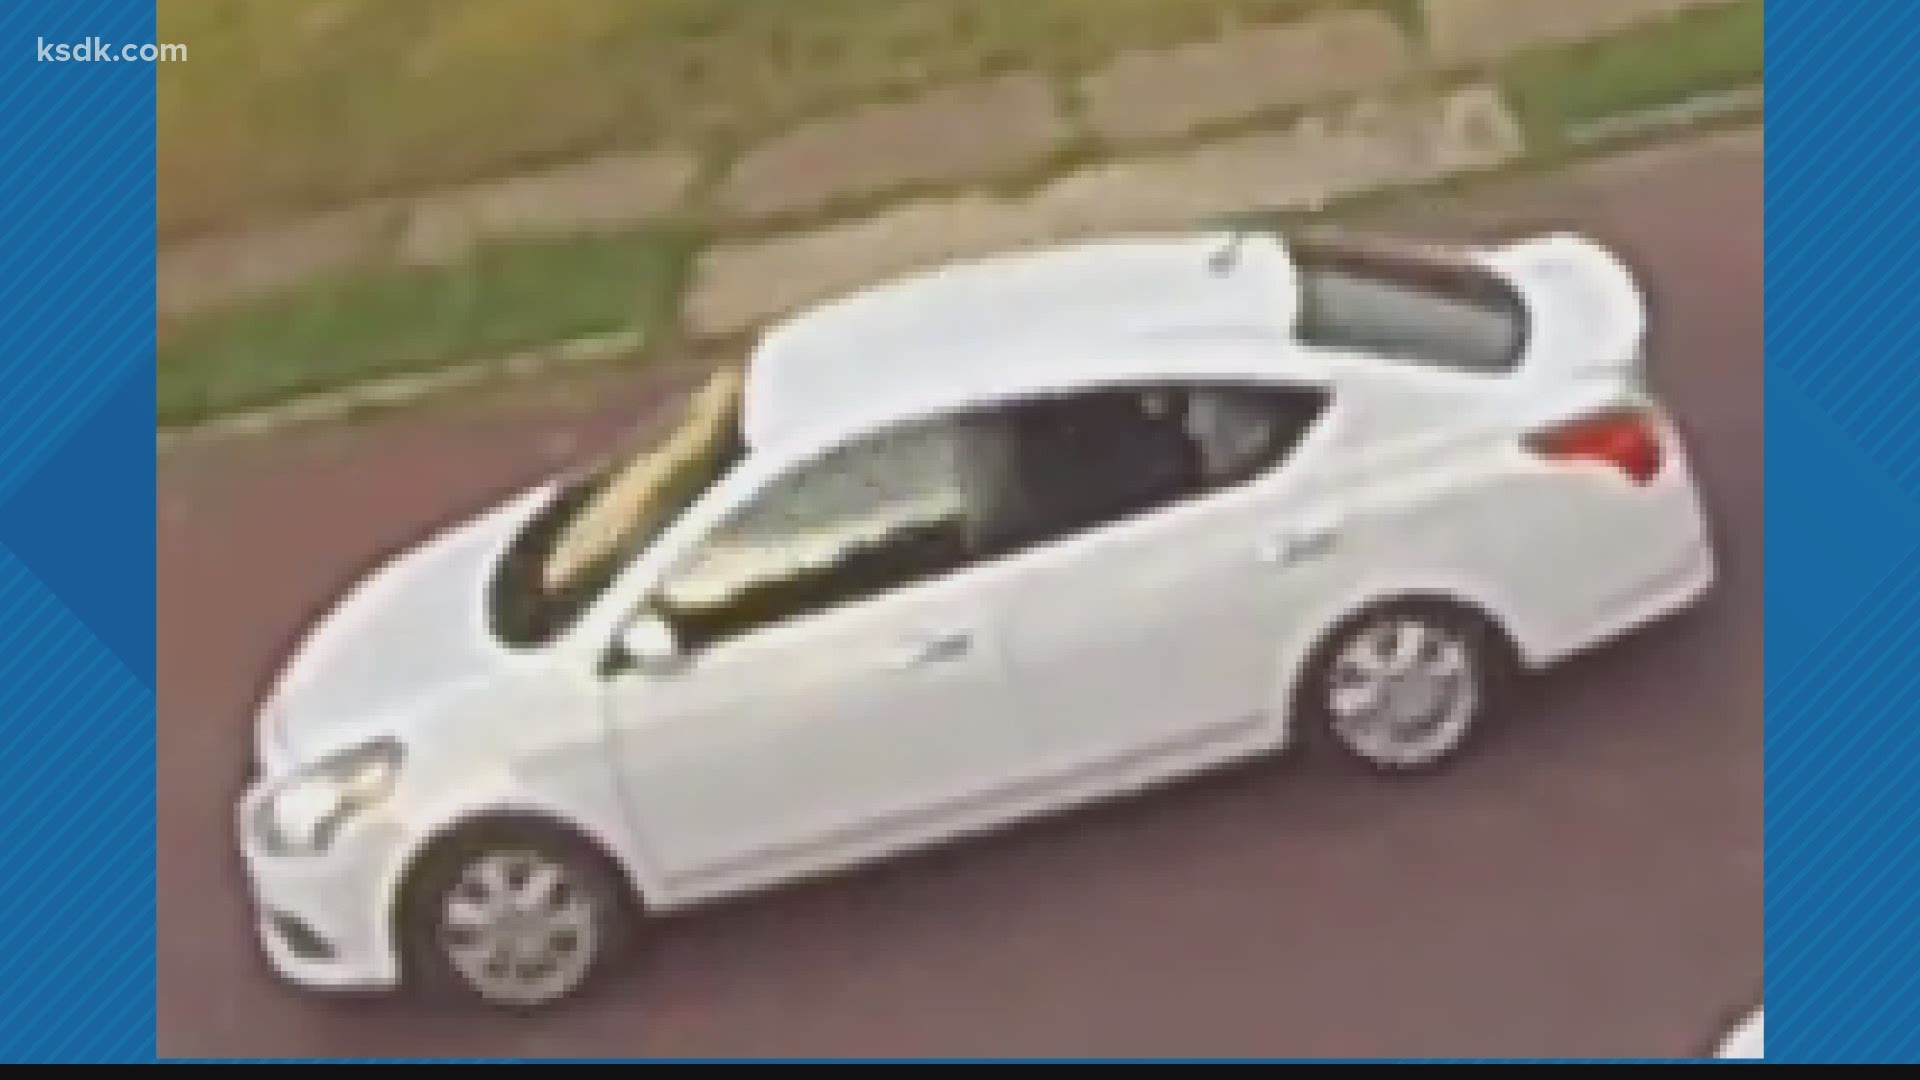 Police are searching for a white Nissan Versa after suspects opened fire on a pair of boys riding their bikes on Keokuk Street